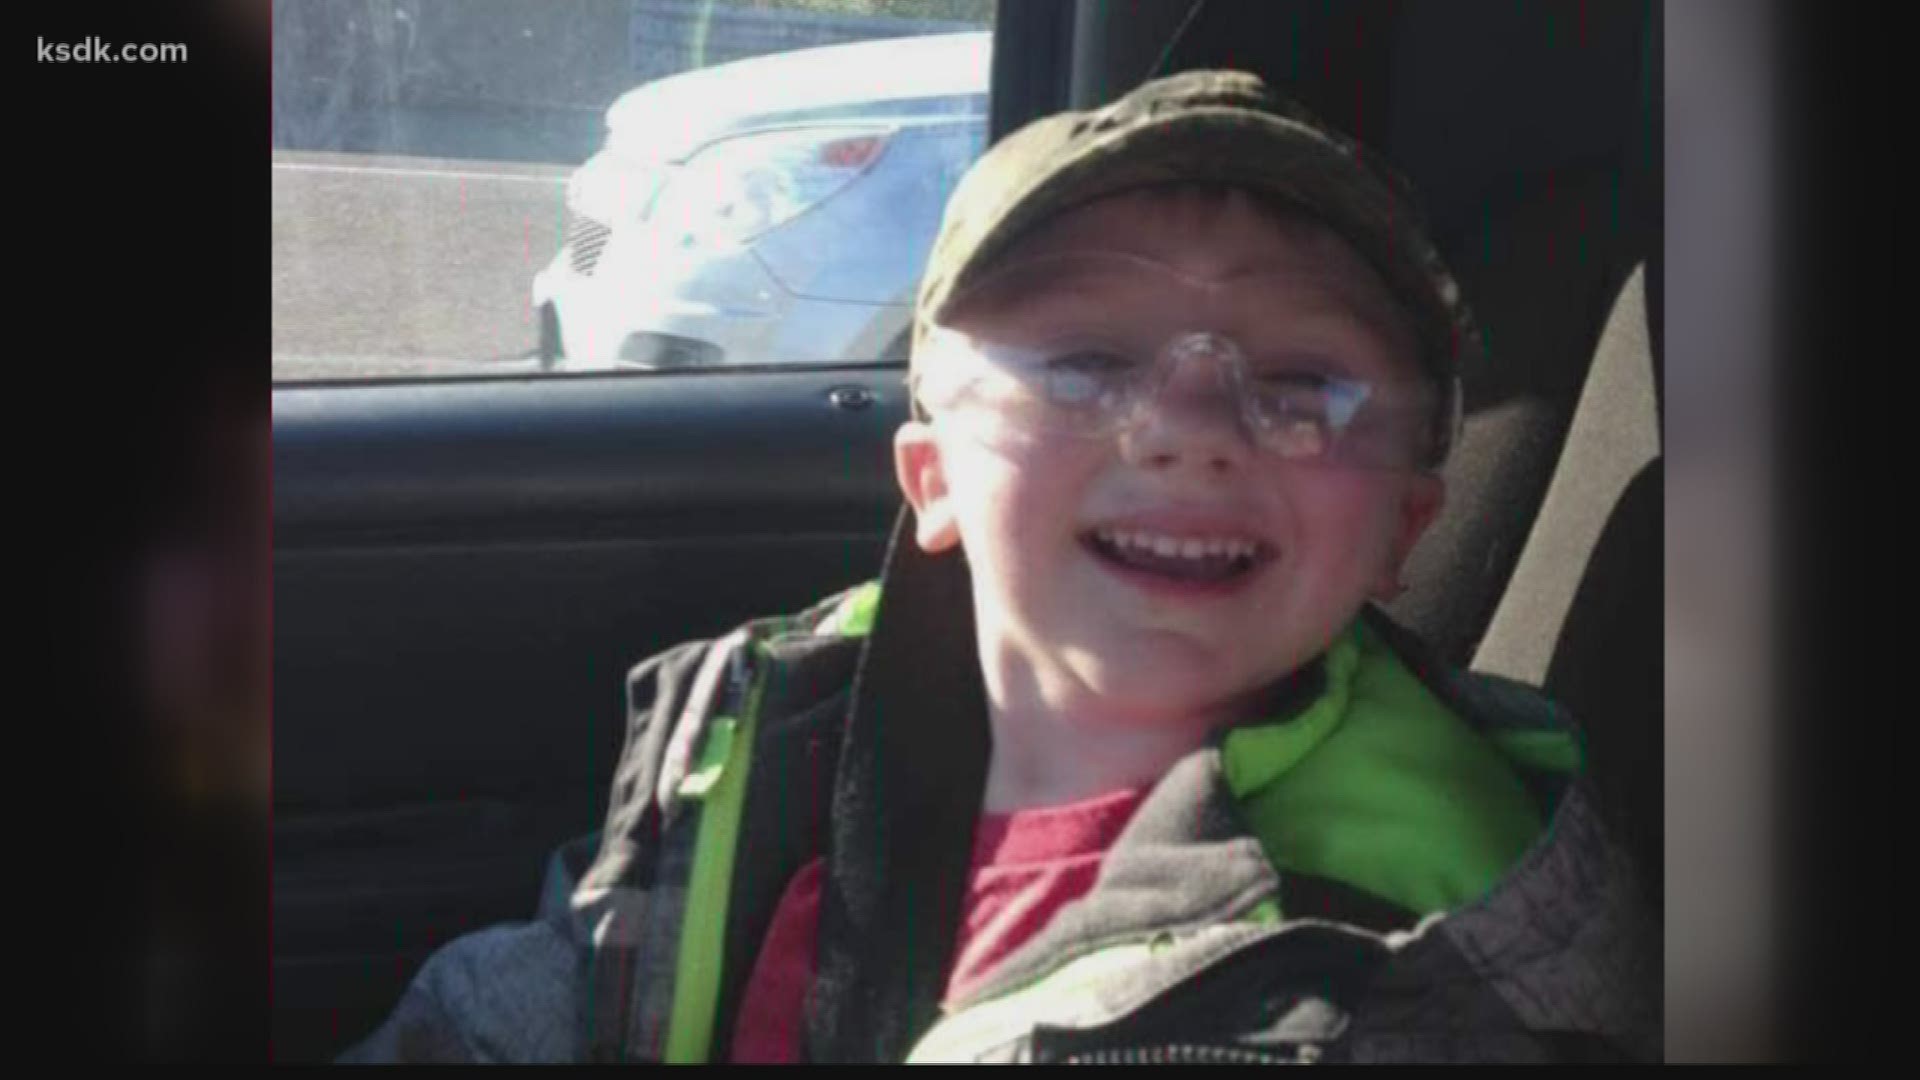 Seven-year-old Jaxon Parks was killed in the blaze.